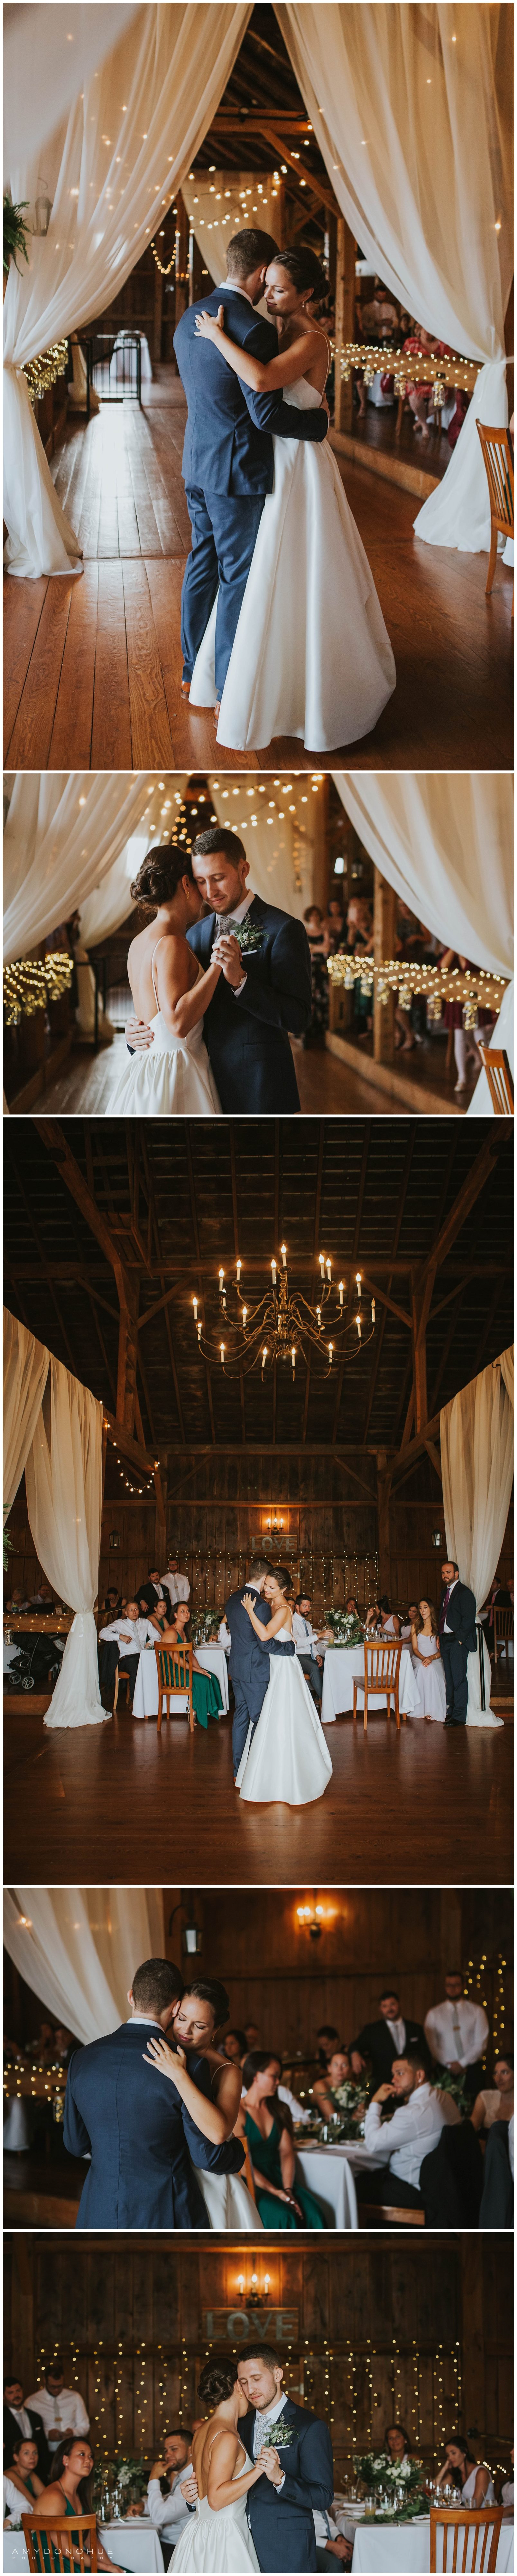 Bride and Groom First Dance | The Barn at Boyden Farms | Vermont Wedding Photographer | © Amy Donohue Photography